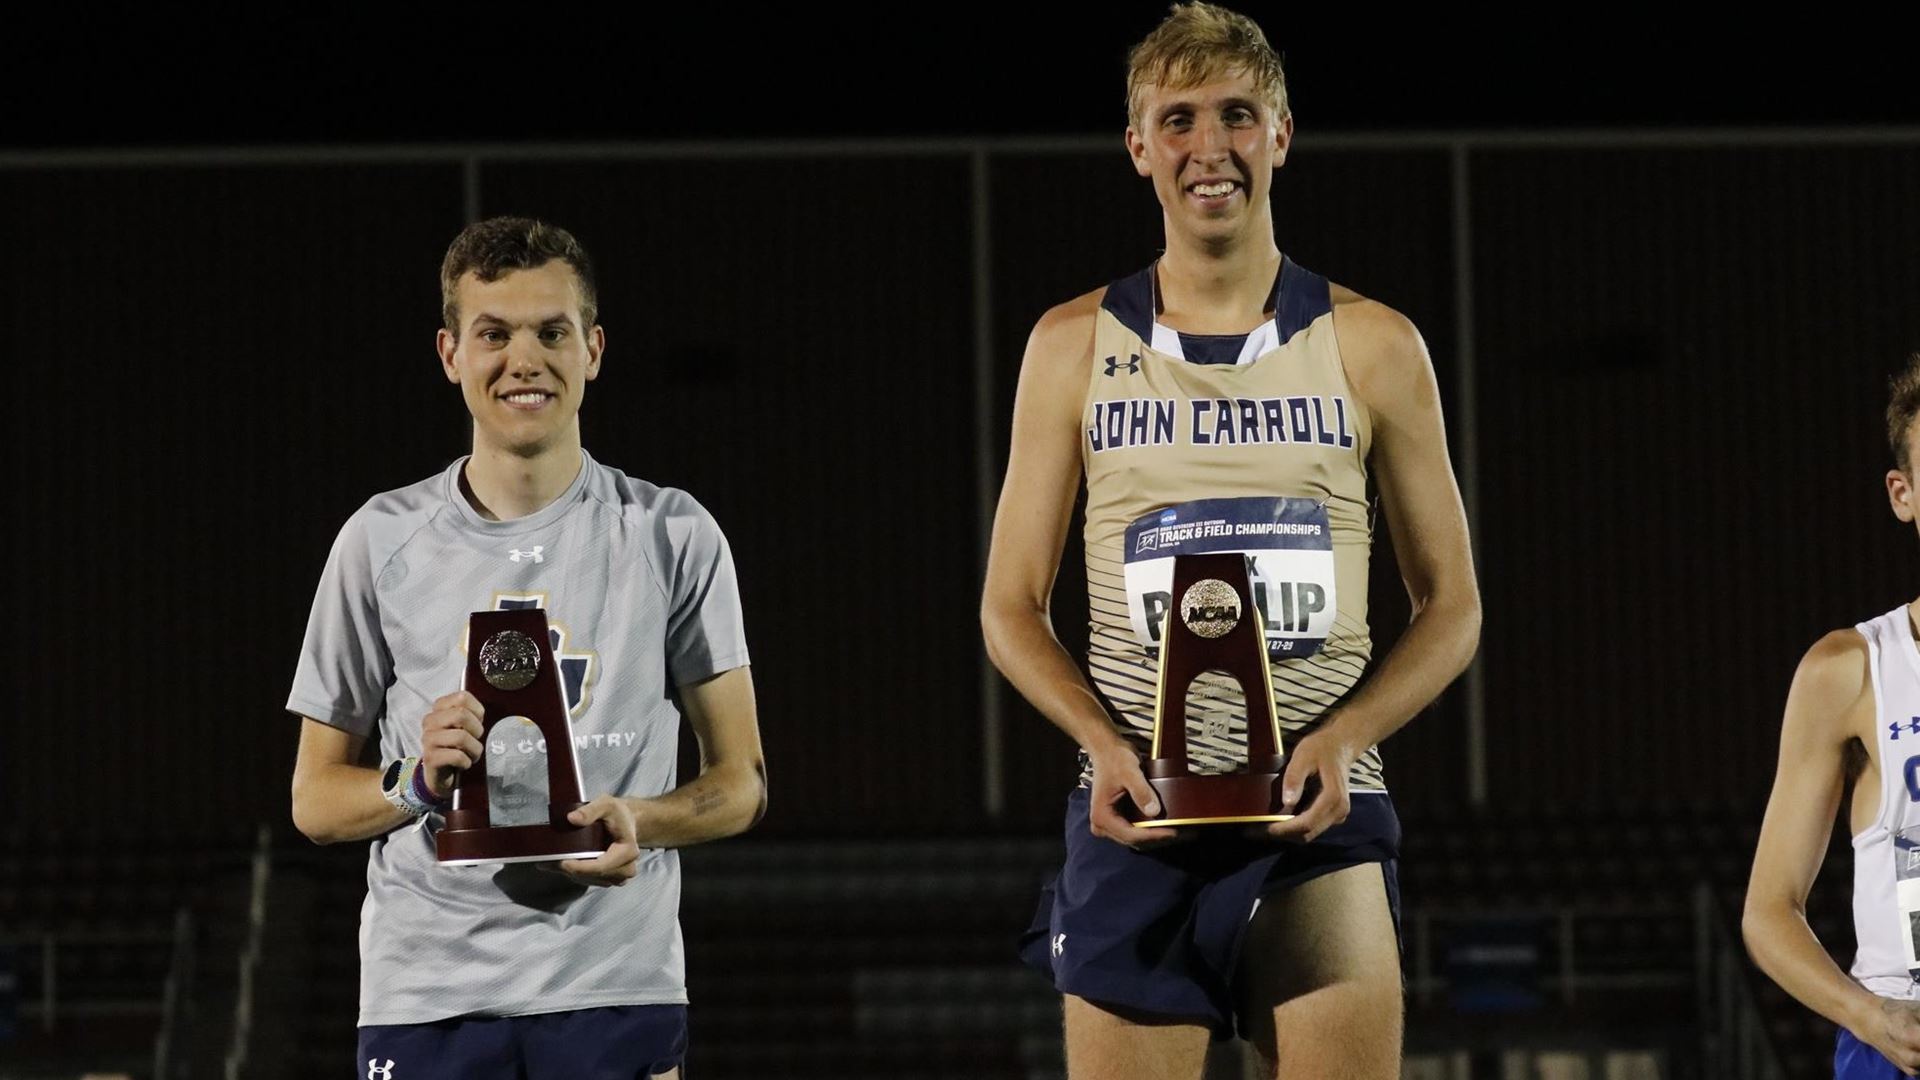 JCU Shines on Day 1 of NCAA Div. III Outdoor Track &amp; Field Championships